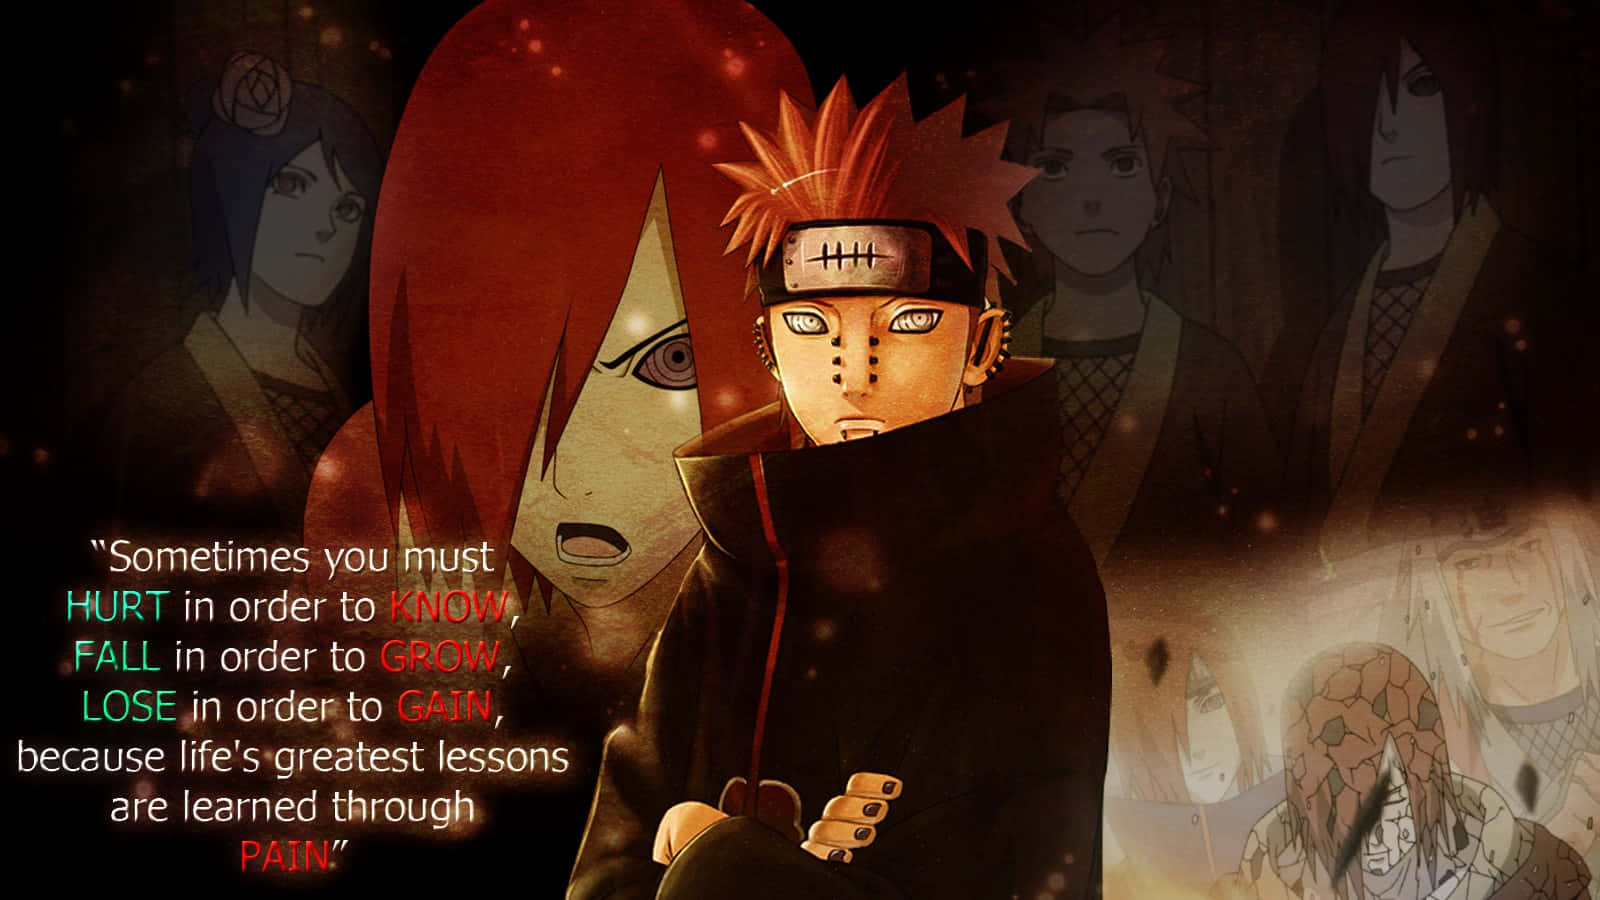 Be the light that guides your path." -Akatsuki Wallpaper